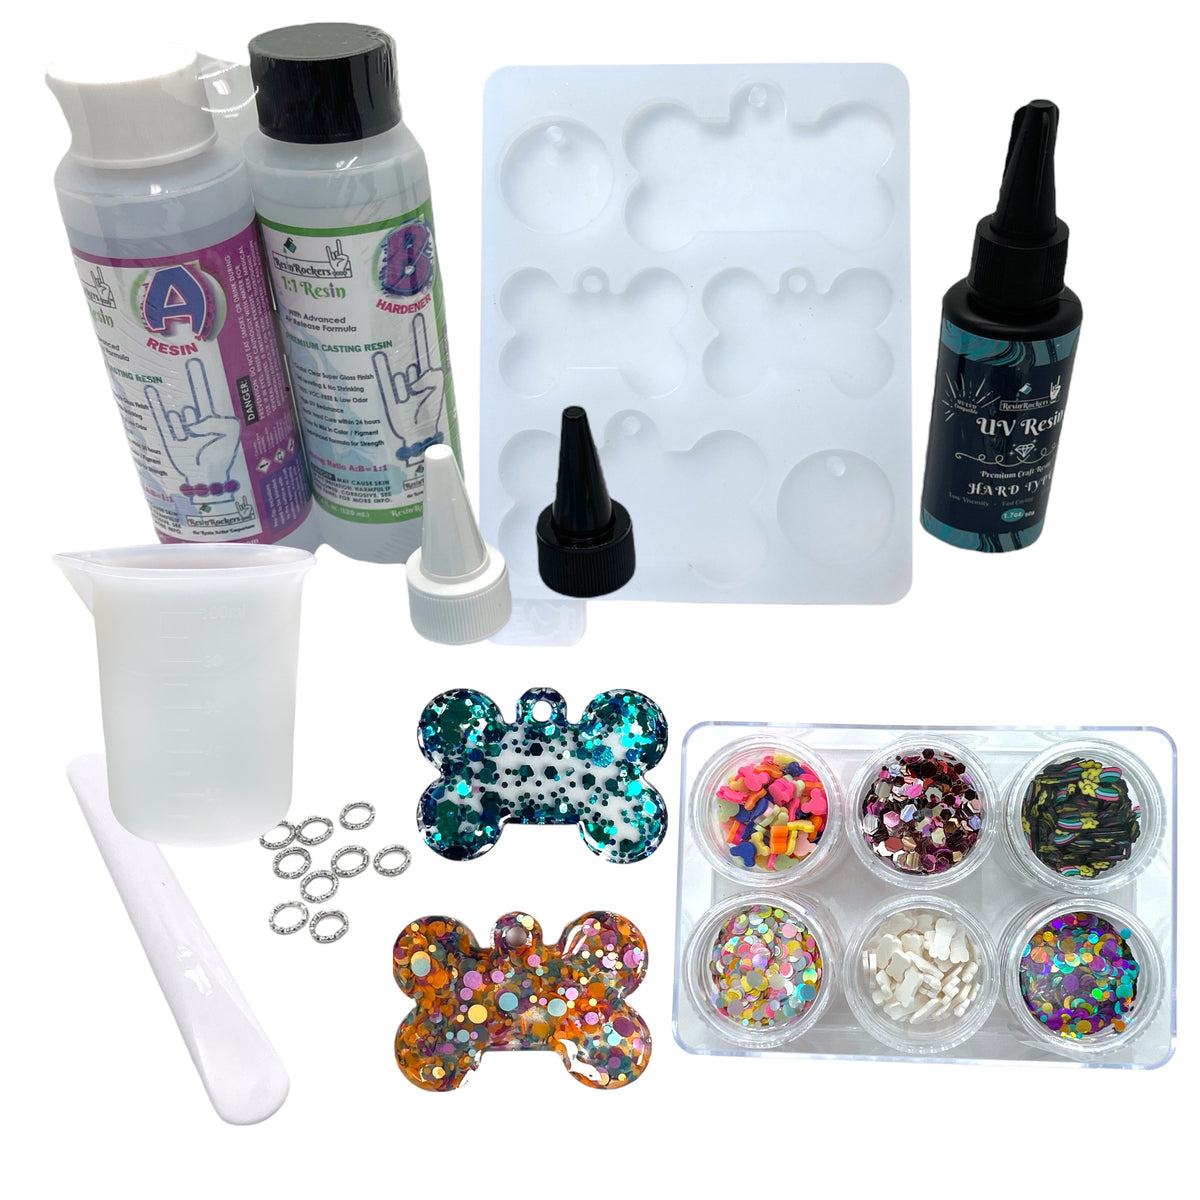 Dog Tag Crafting Kit with Exclusive Resin Rockers UV Safe Mold and More!